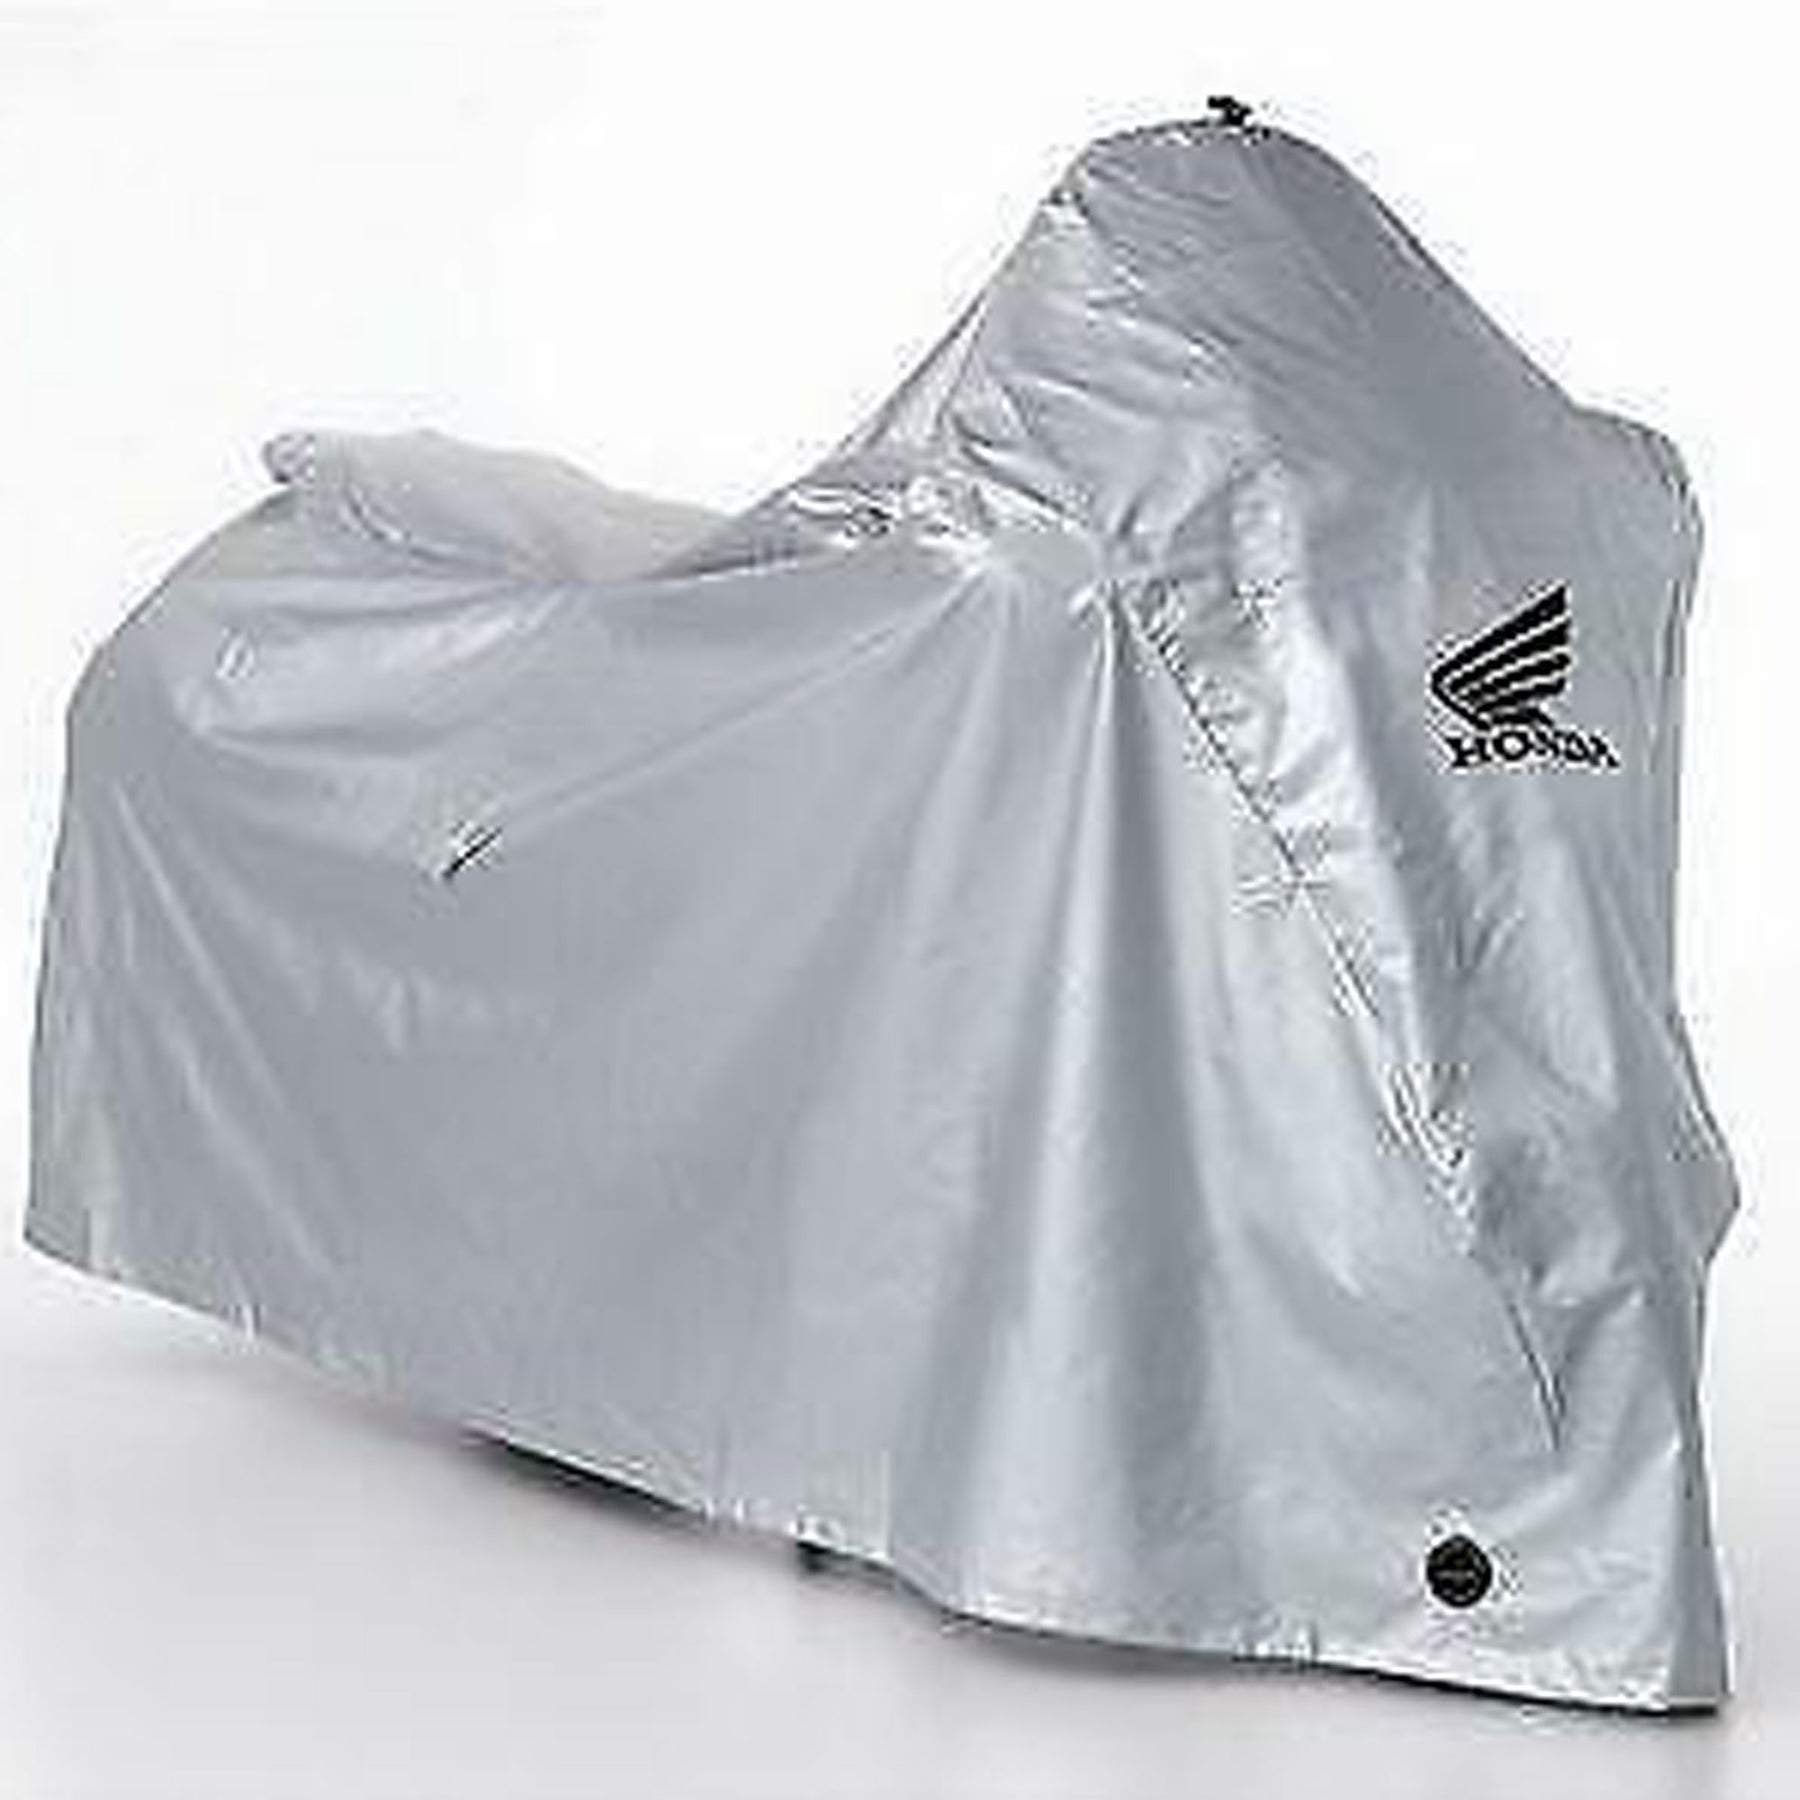 Forza 350 - Outdoor Motorcycle Cover